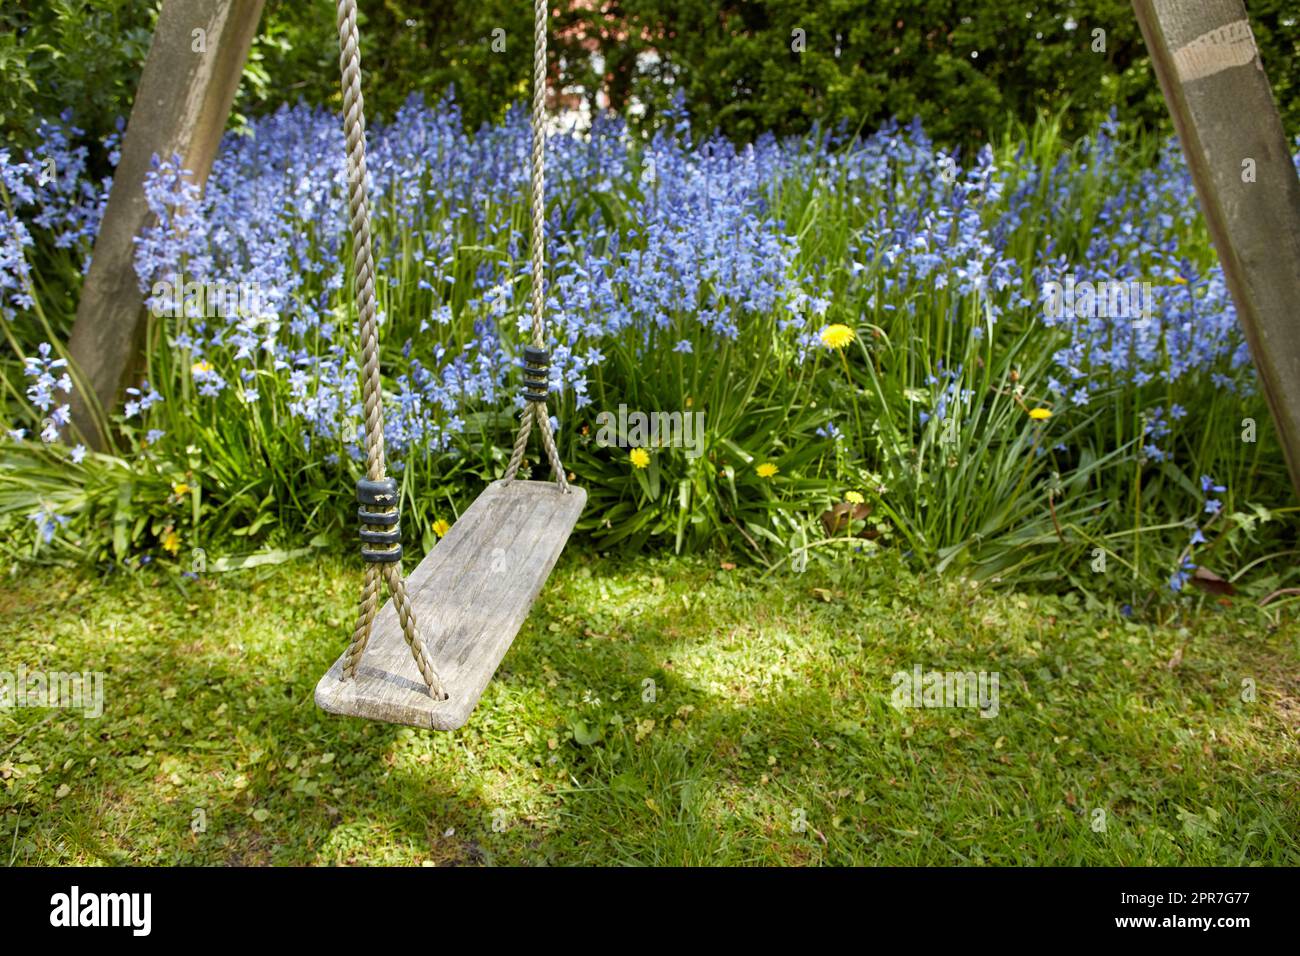 Old wooden swing in a garden with blue flowers and moss in a lush backyard. Peaceful scene of a forgotten playground with vibrant wild bluebells and overgrown lawn in spring with copy space Stock Photo